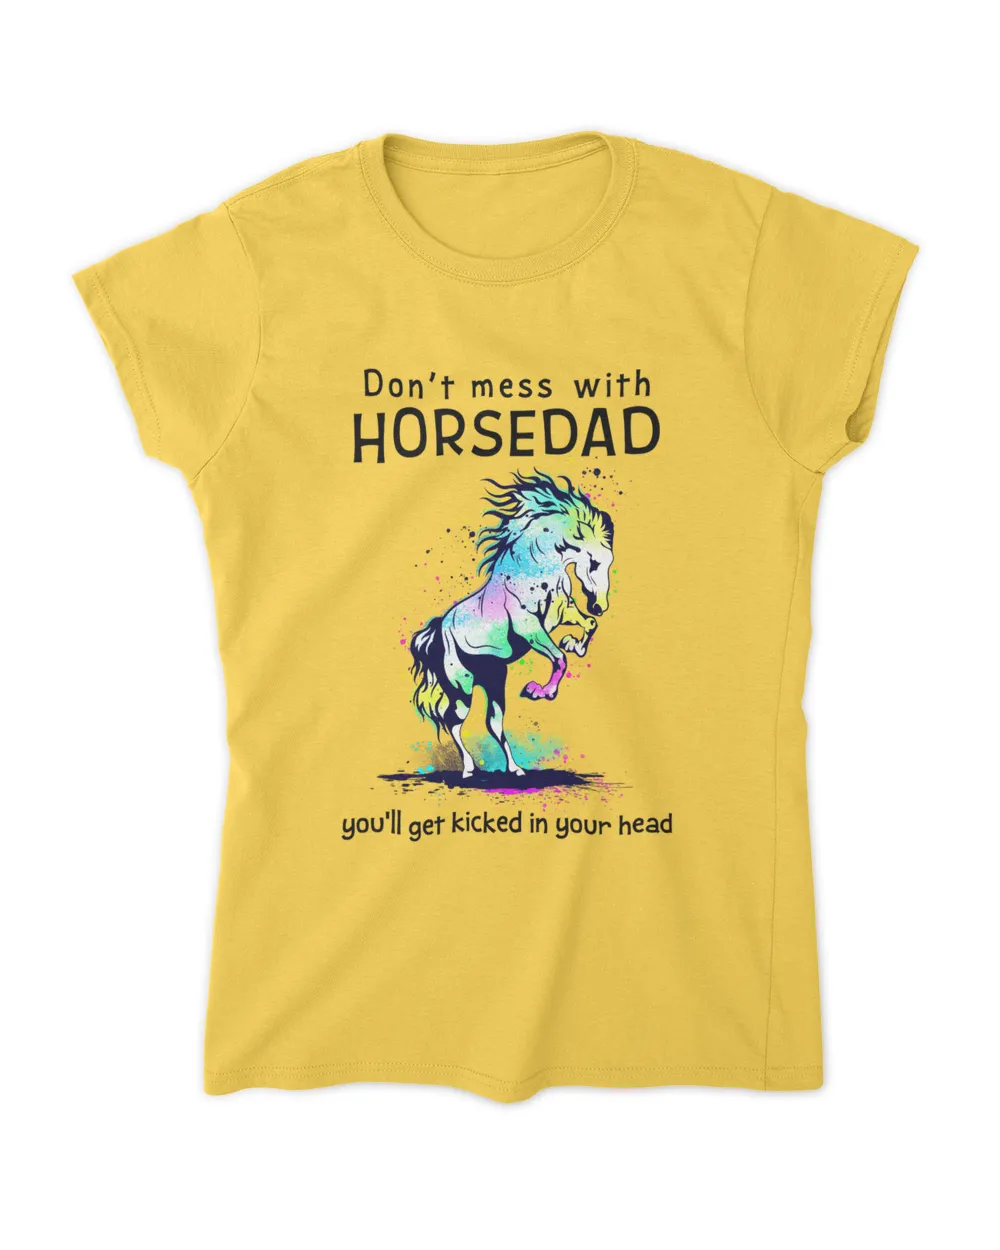 Don't mess with Horsedad you'll get kicked in your head